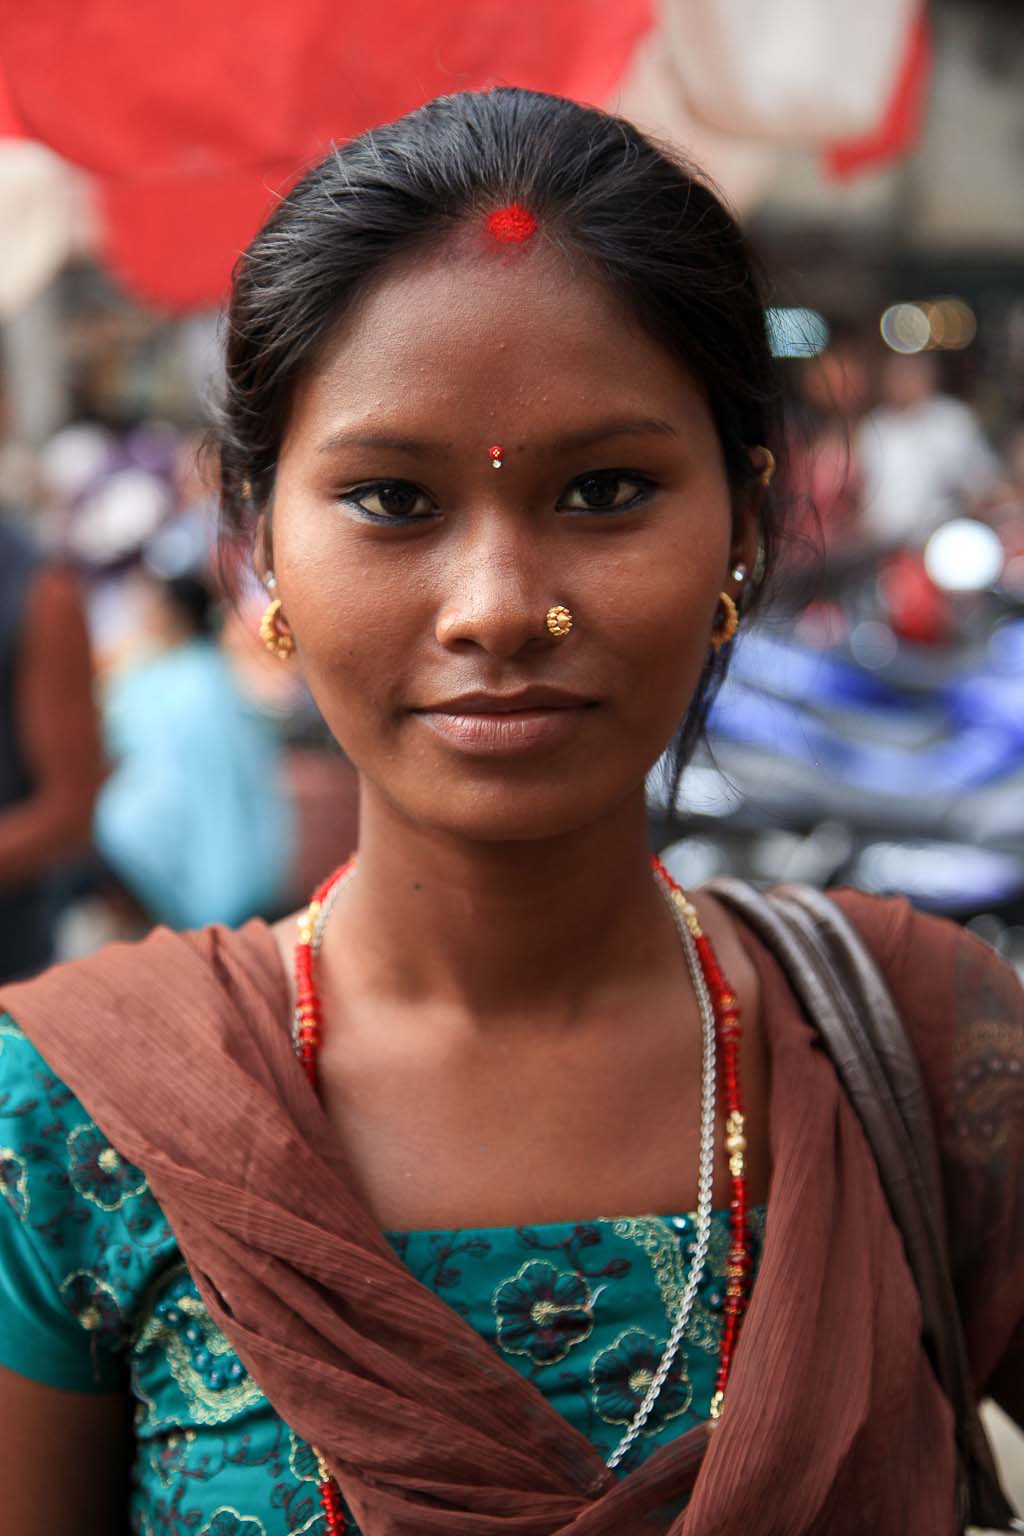 Who Is The Beautiful Woman In India : Beautiful Indian woman in saree and jewellery mobile ... : They lived as shepherds at gokul mathura about a thousand years ago.